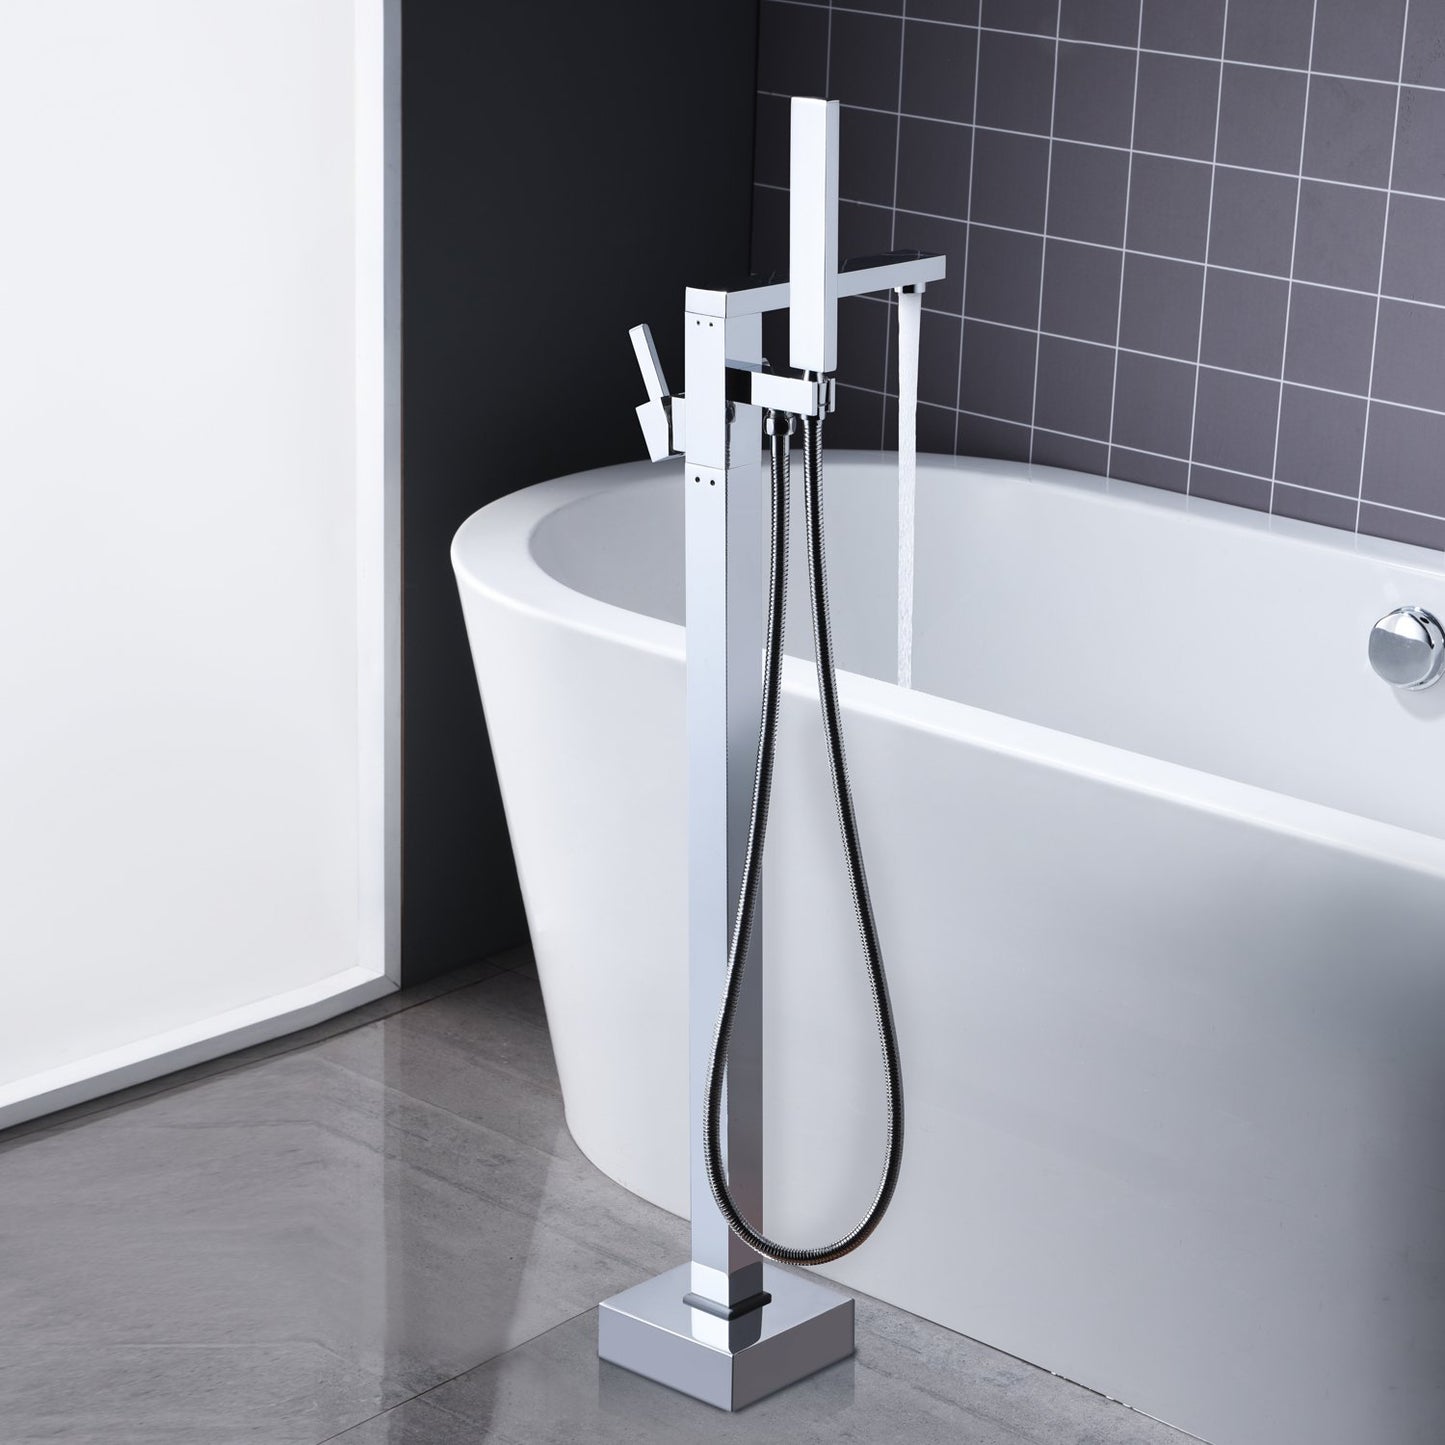 Chrome-Plated Free standing Standing Square Style Bath Mixer